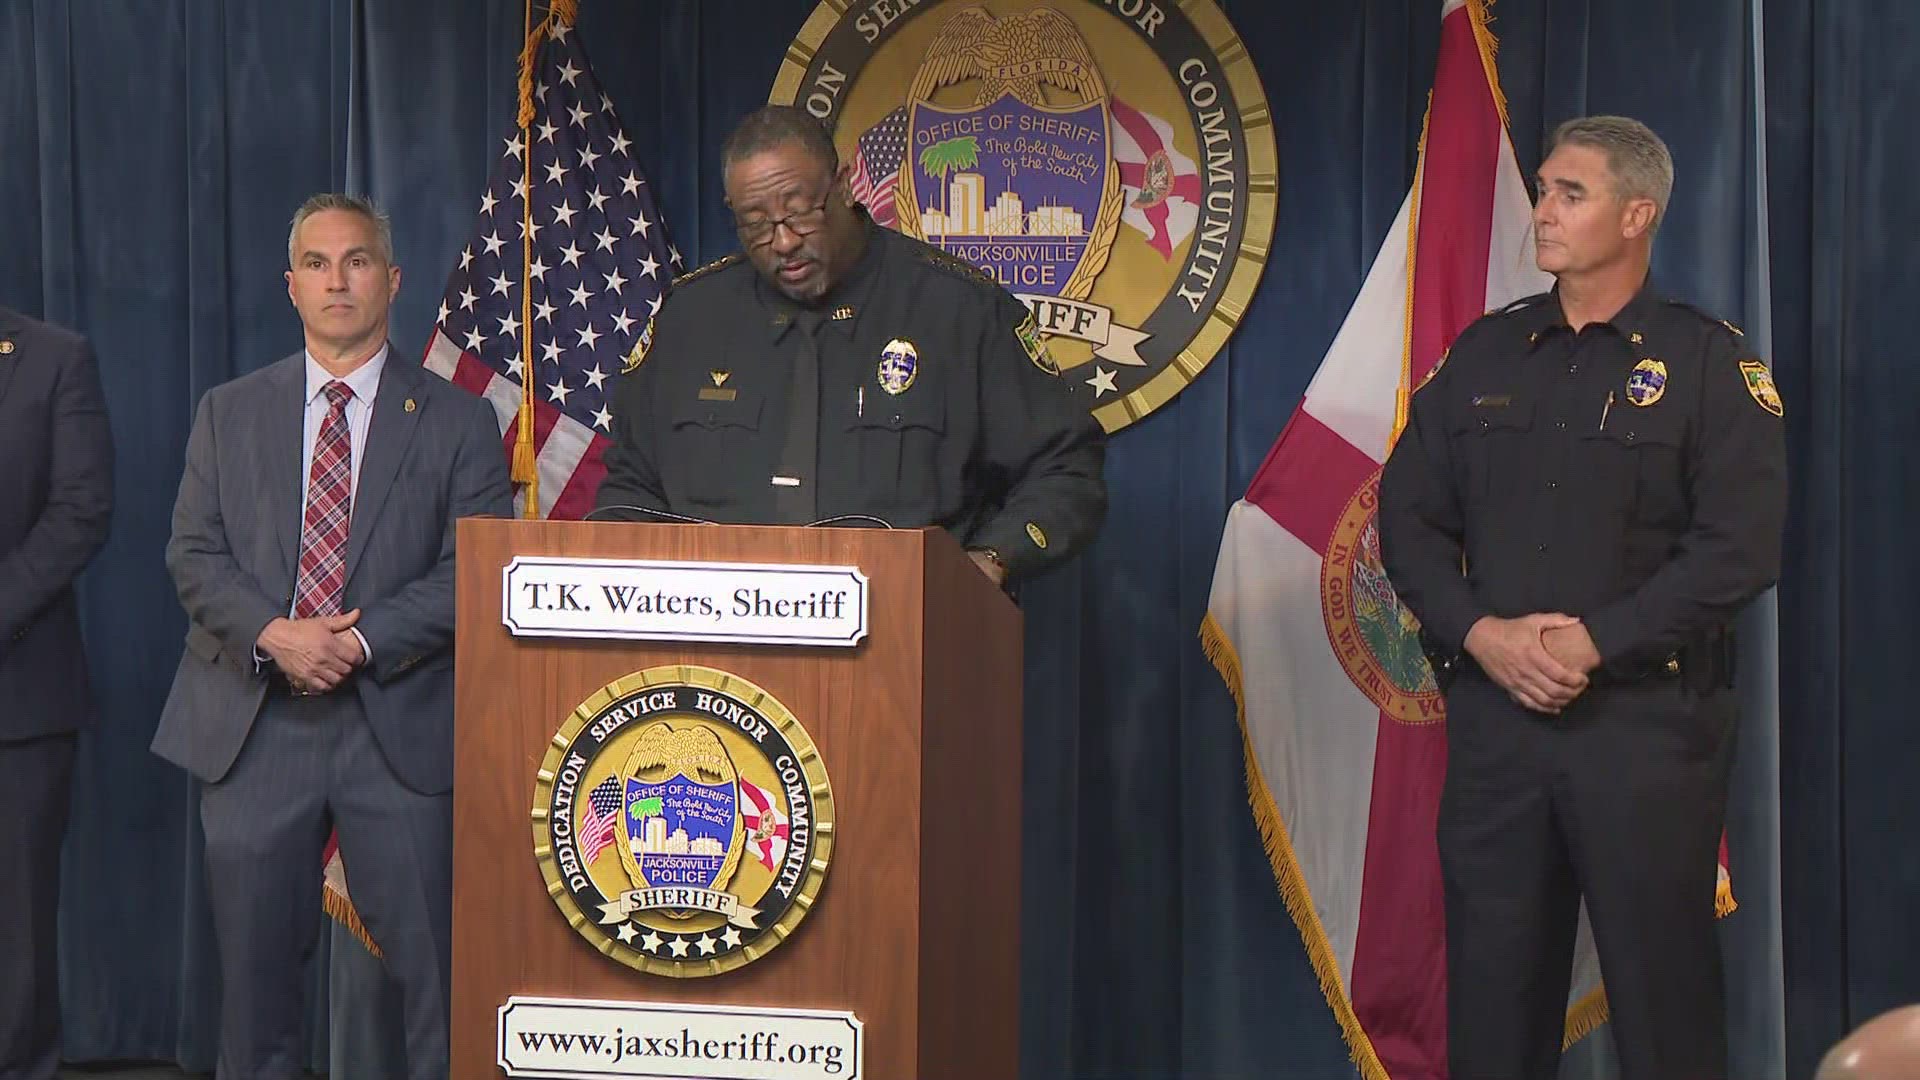 Sheriff T.K. Waters said this amount of fentanyl is equivalent to 375,000 lethal doses.